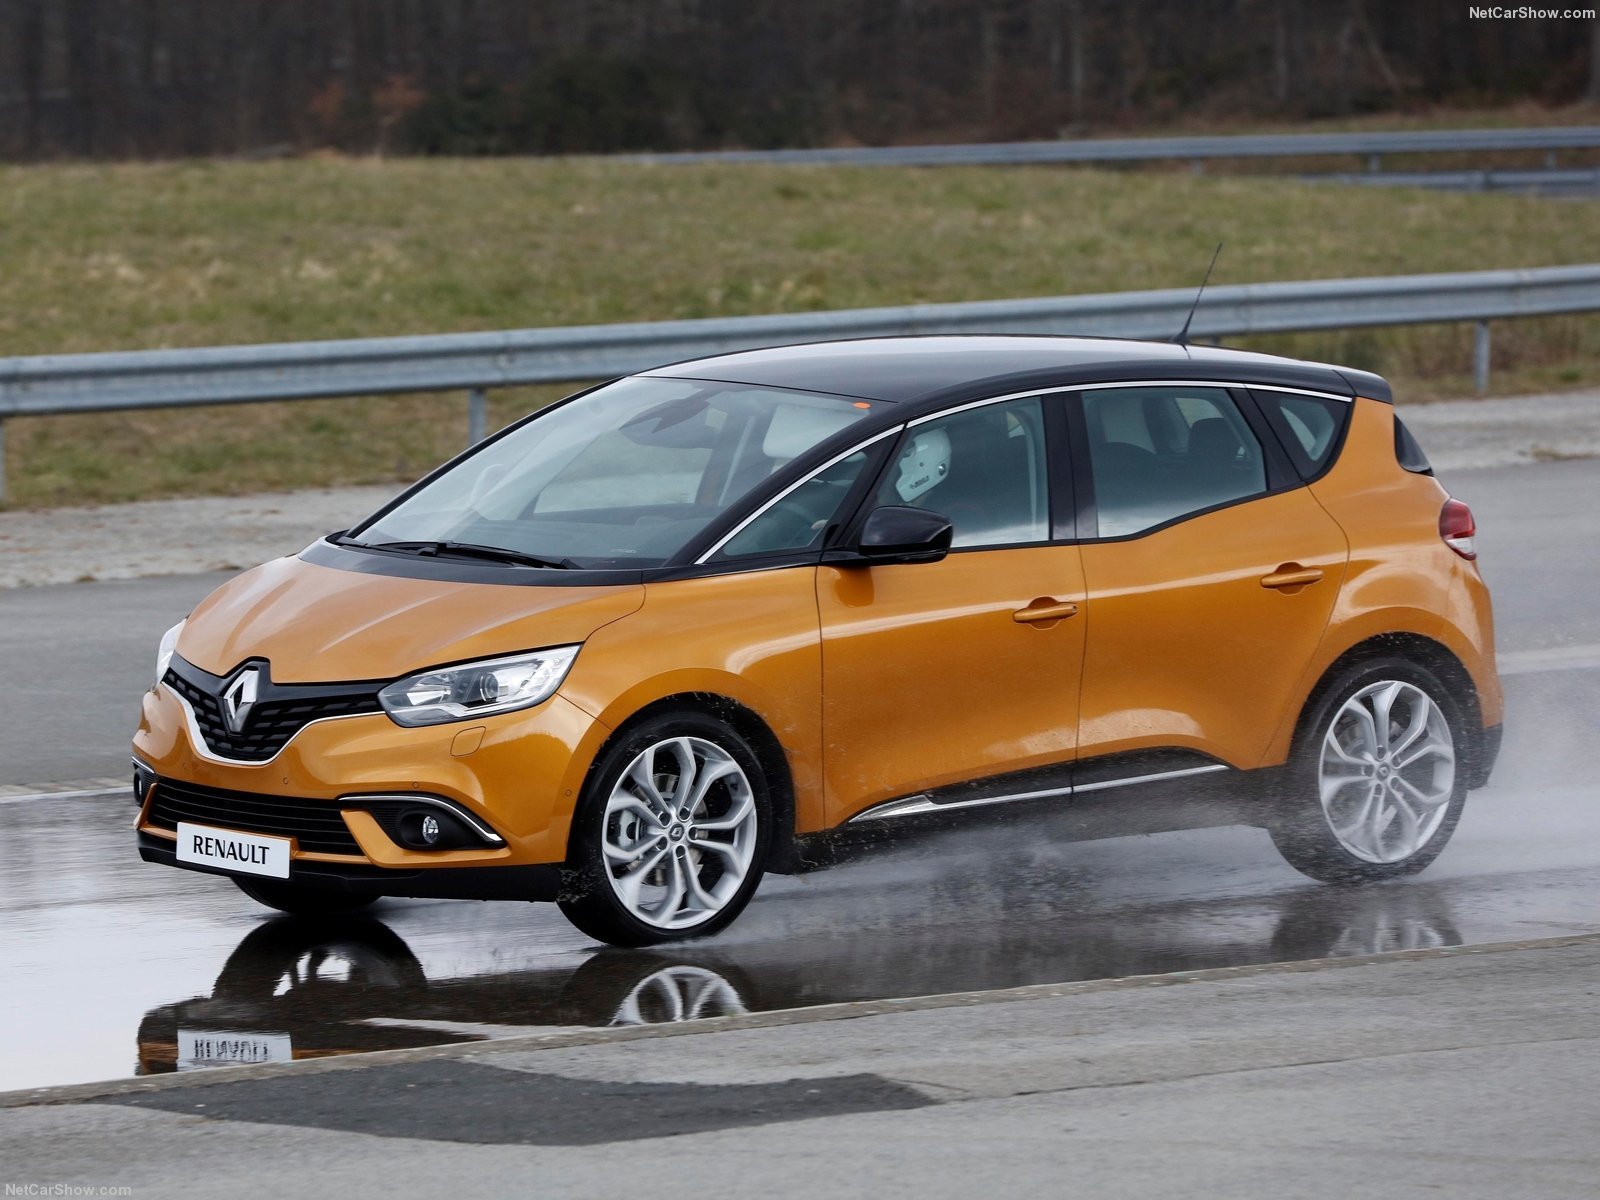 2016, Cars, Renault, Scenic, French Wallpaper